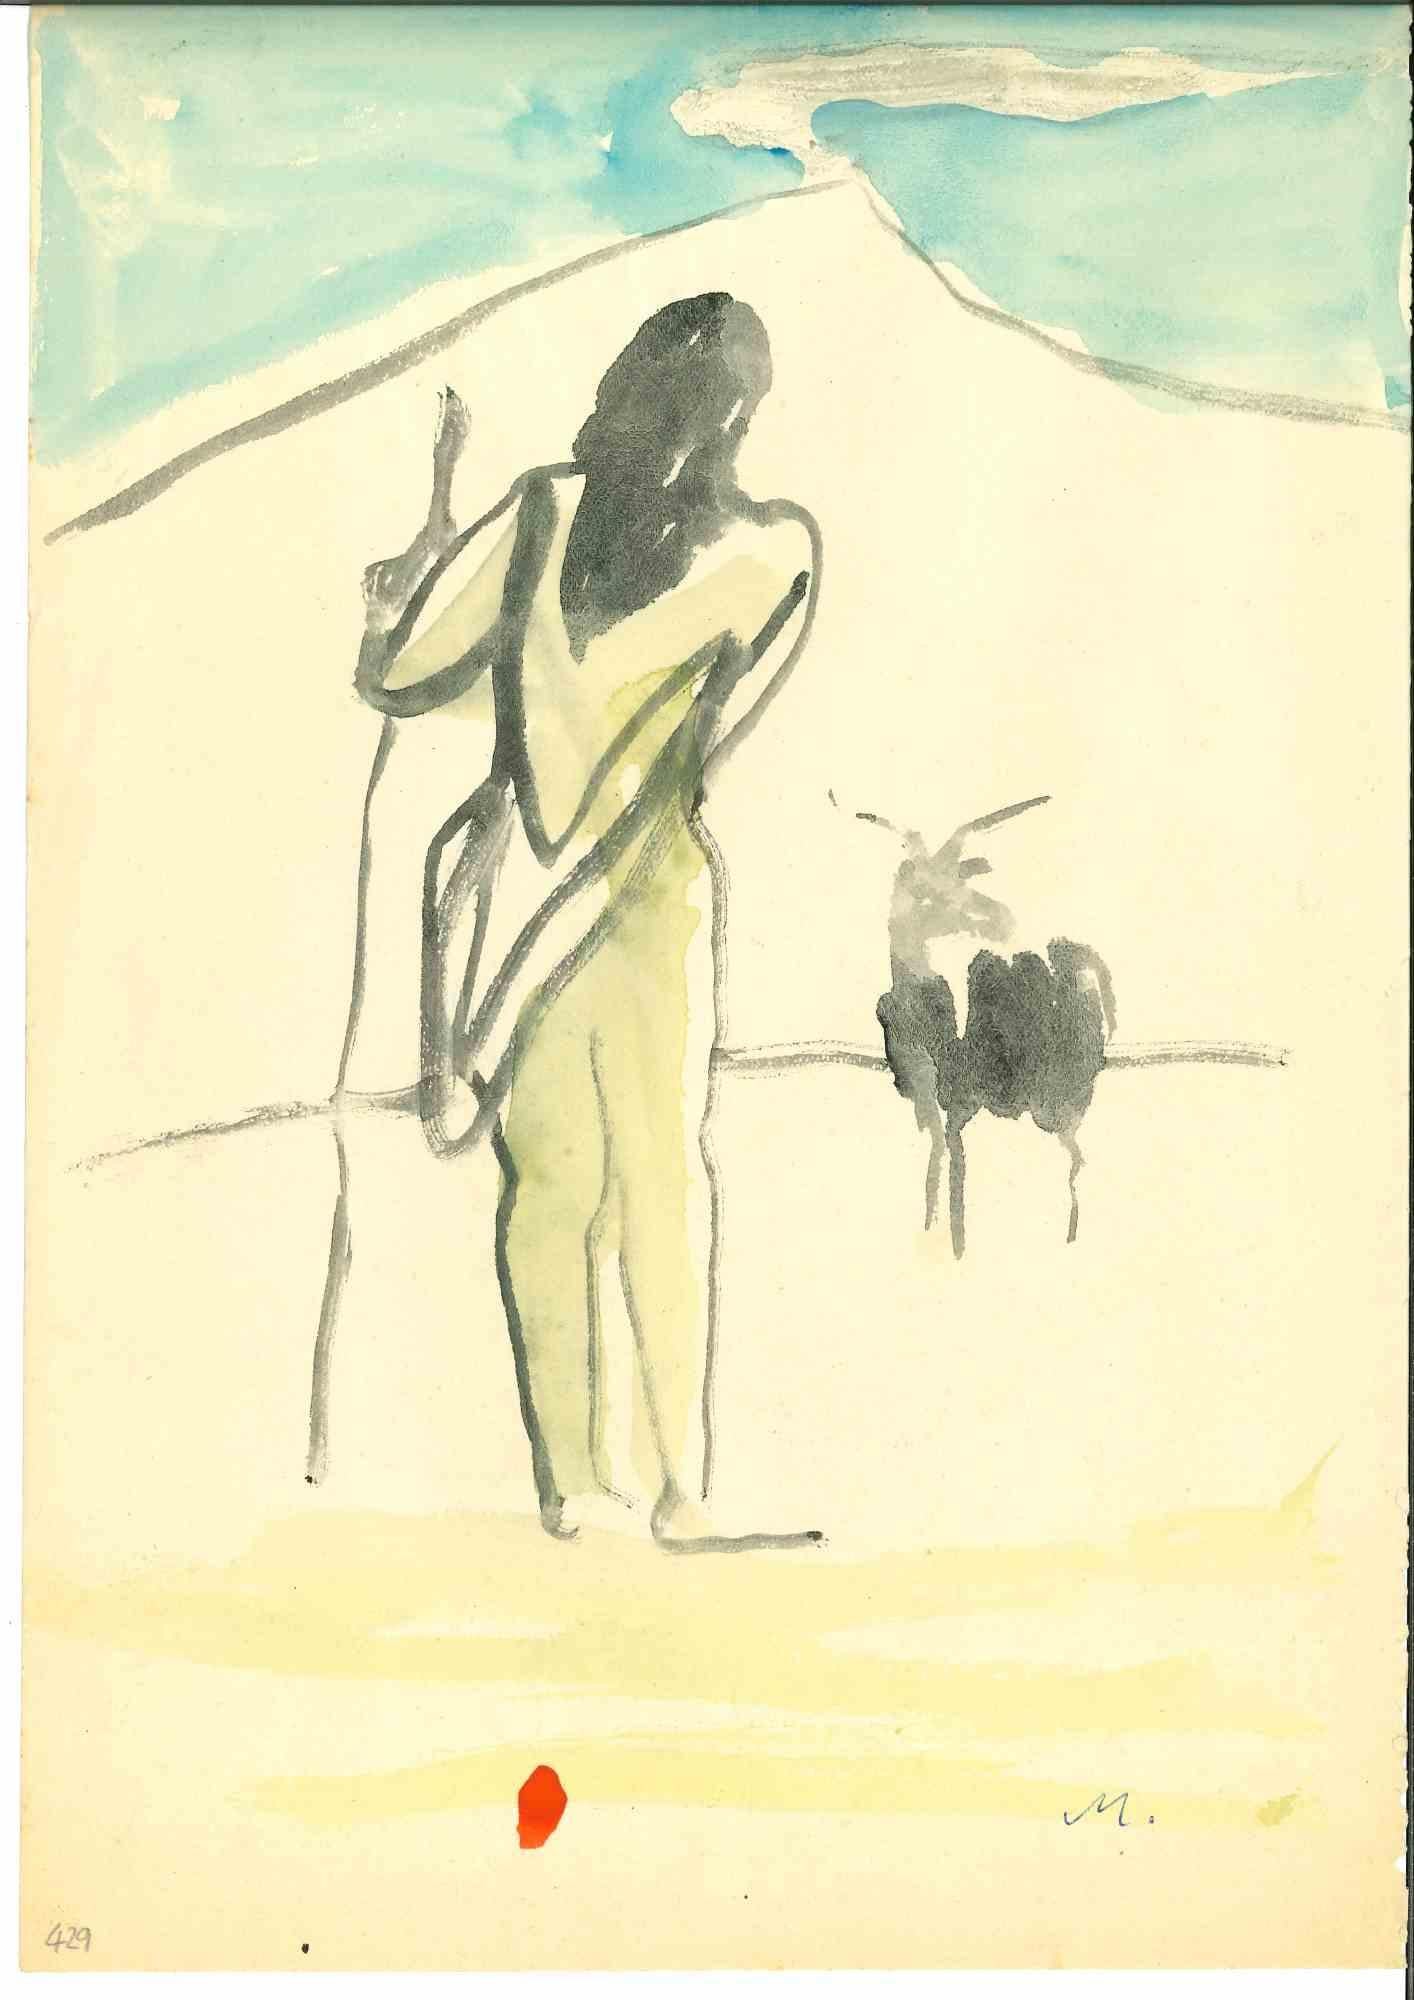 The Shephard is a Watercolor Drawing realized by Mino Maccari  (1924-1989) in the Mid-20th Century.

Hand-signed on the lower.

Good conditions.

Mino Maccari (Siena, 1924-Rome, June 16, 1989) was an Italian writer, painter, engraver and journalist,